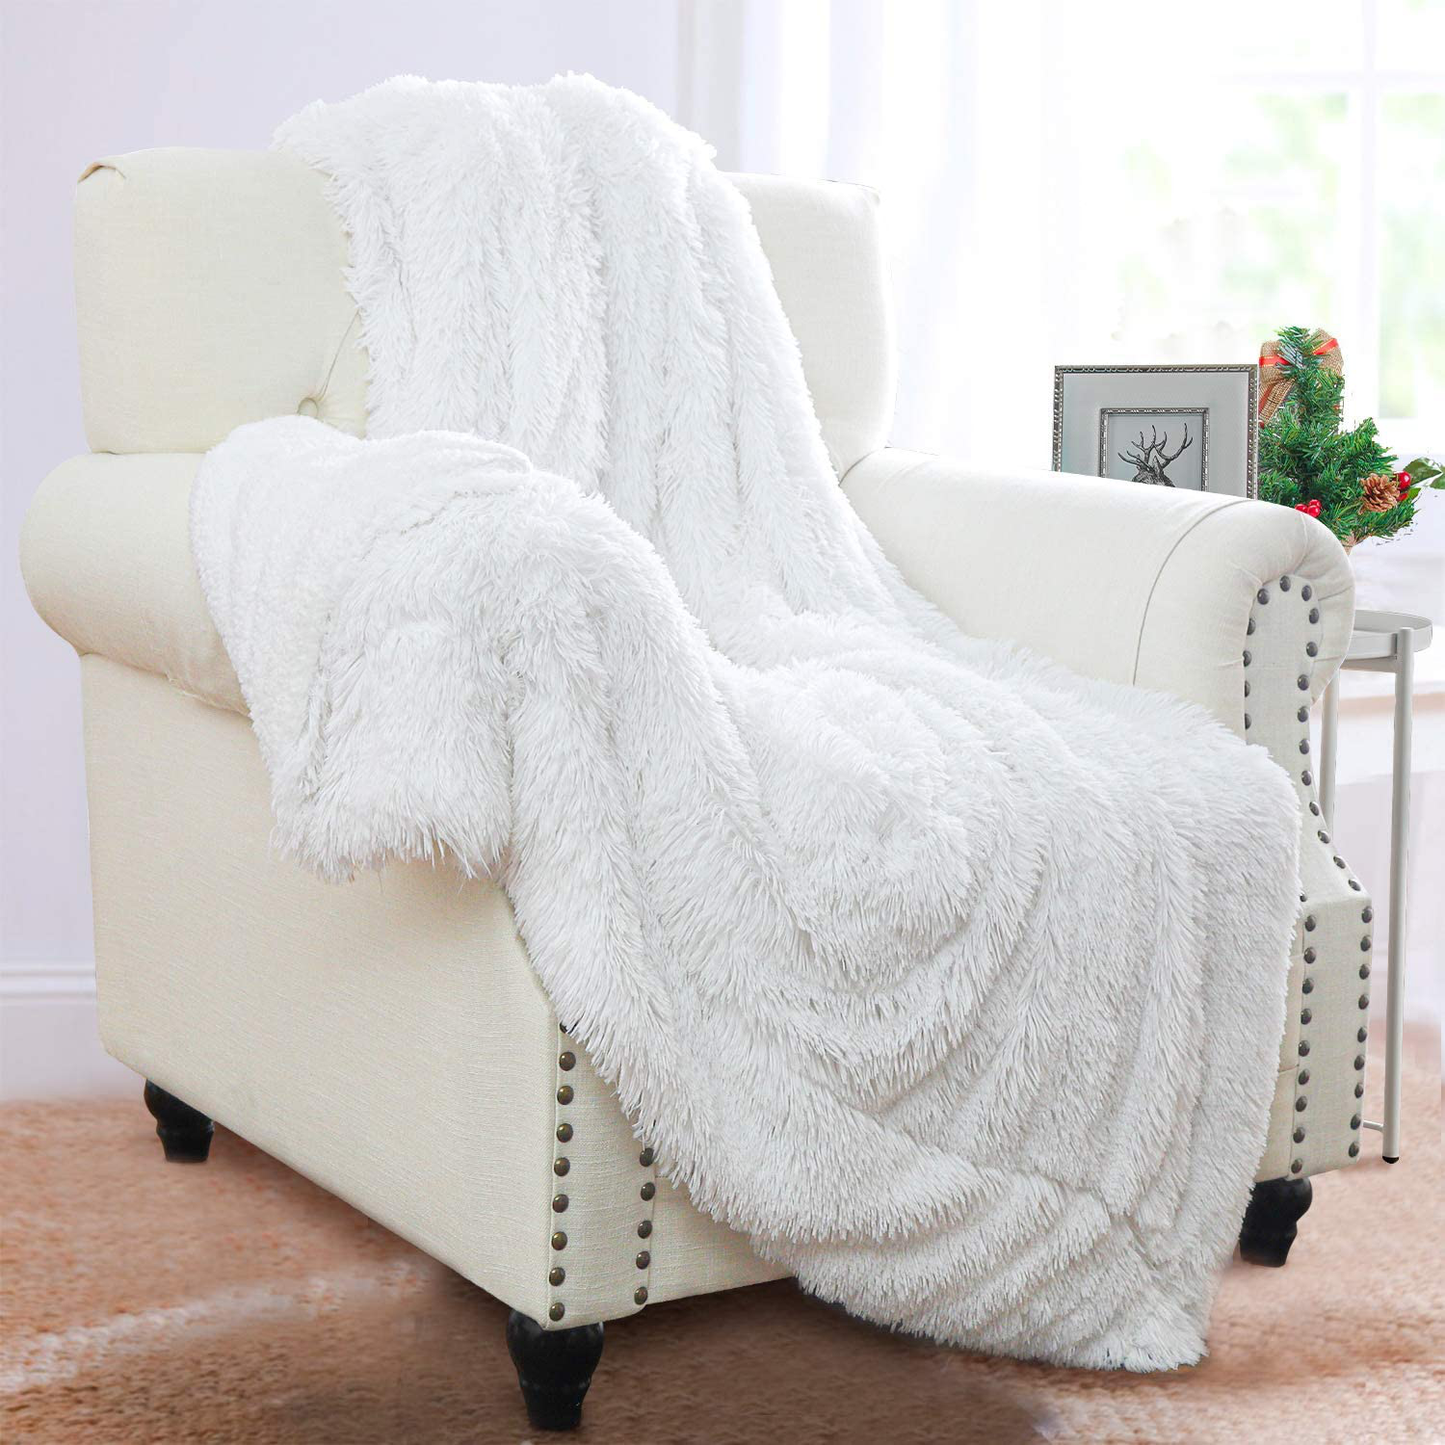 BENRON Plush Throw Blankets, Super Soft Shaggy Fuzzy Sherpa Blankets, Cozy Warm Lightweight Fluffy Faux Fur Blankets for Bed Couch Sofa Photo Props Home Decor, Washable 50''X60'' White